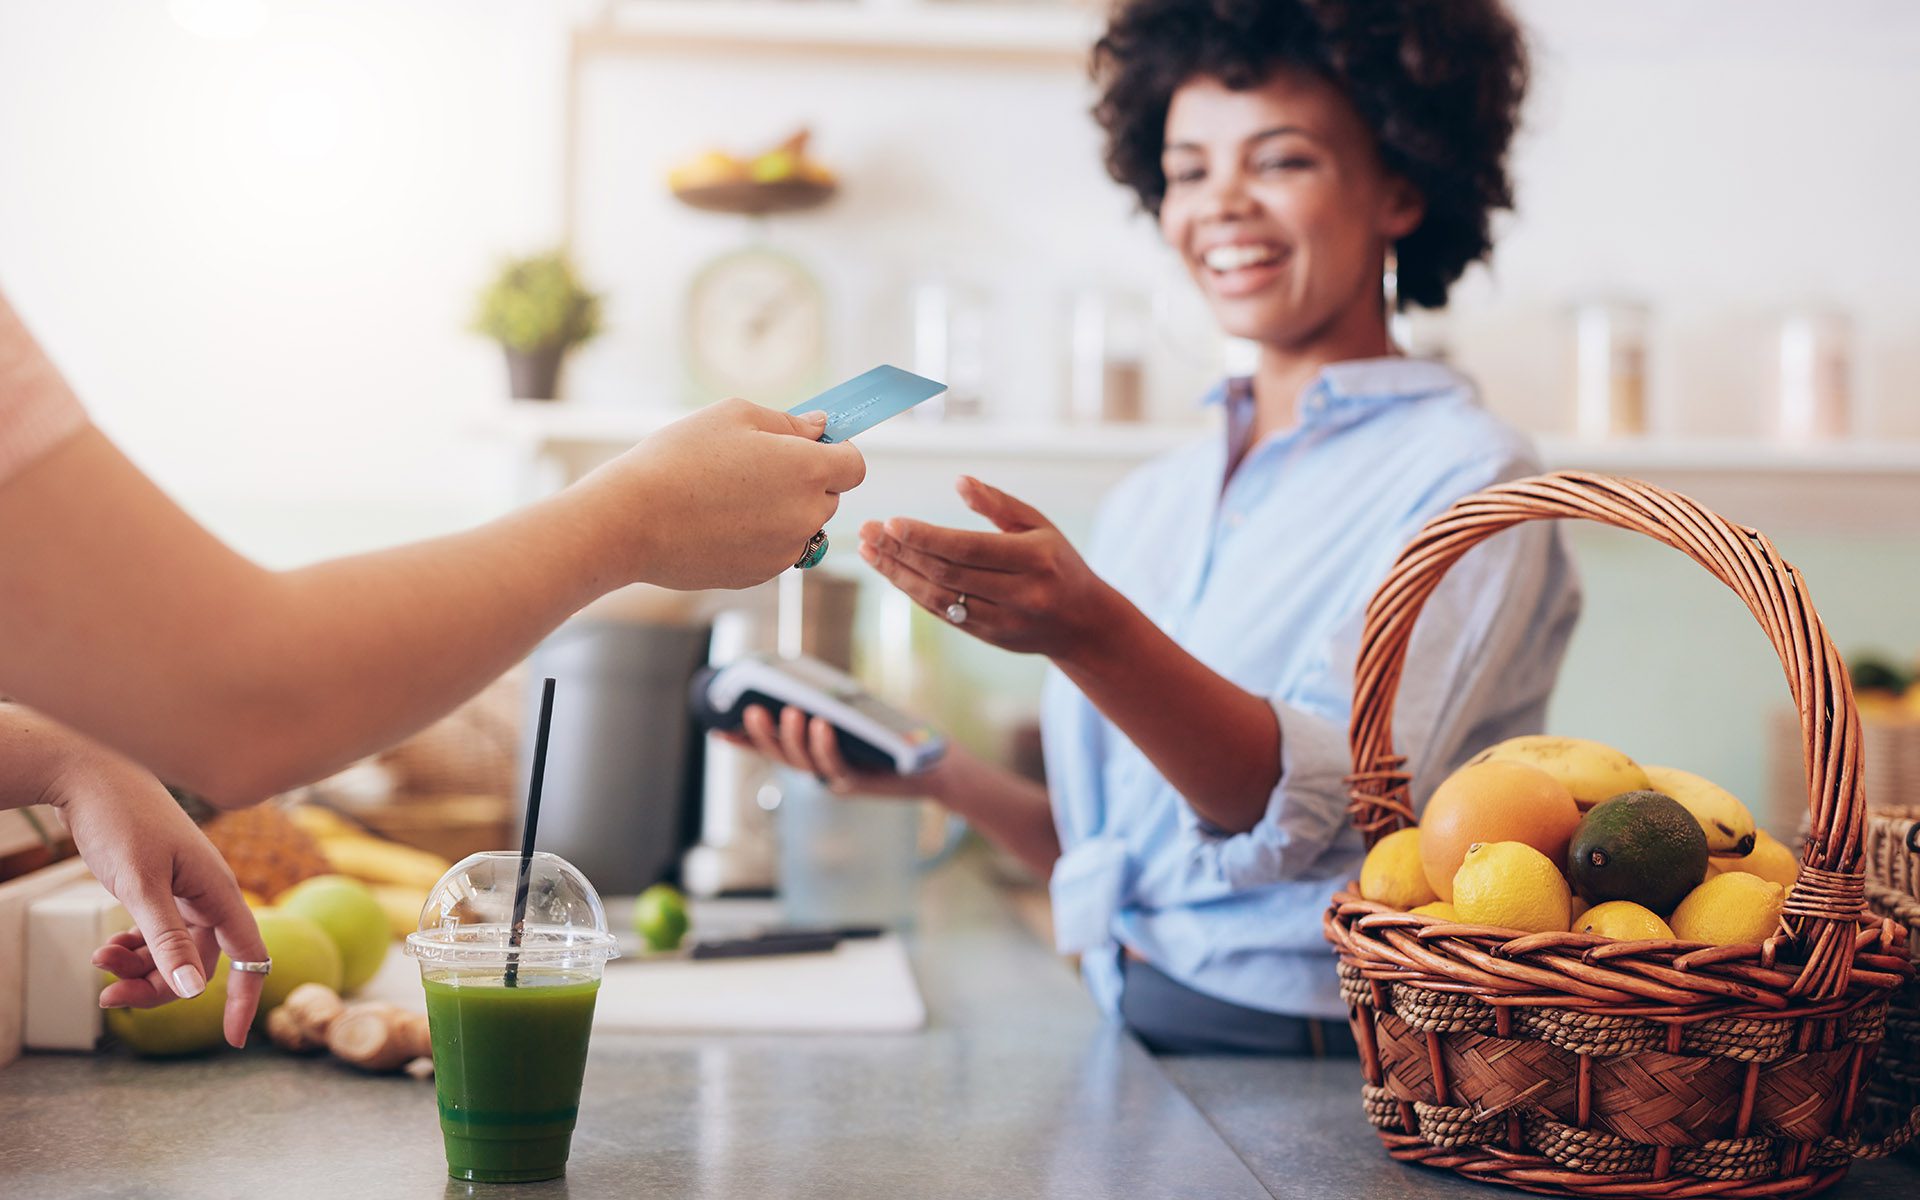 Landing Page #2 - Woman Exchanging Money at the Counter for a Smoothie